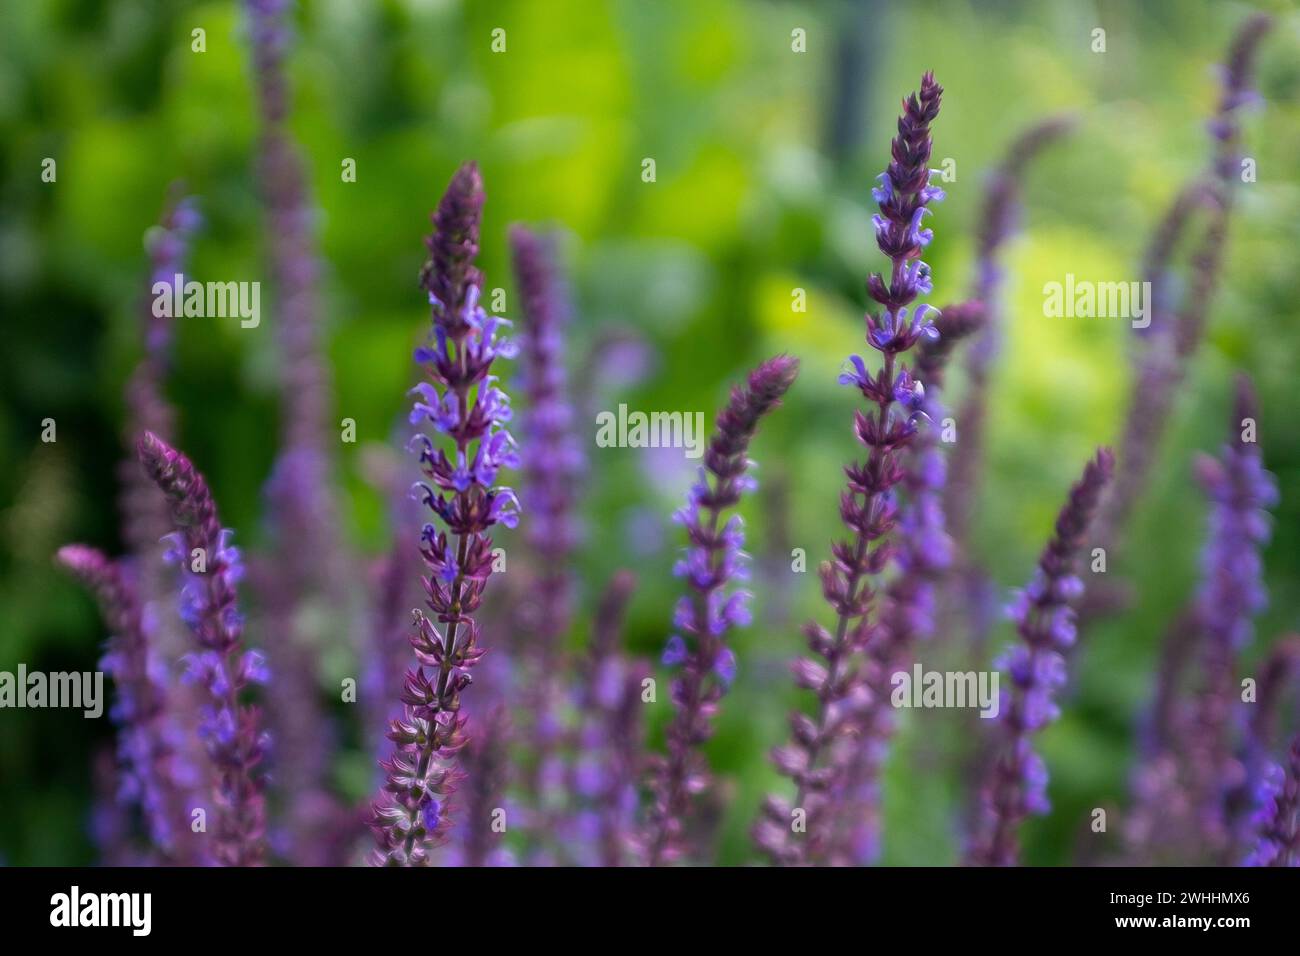 violet salvia blooming in a garden Stock Photo